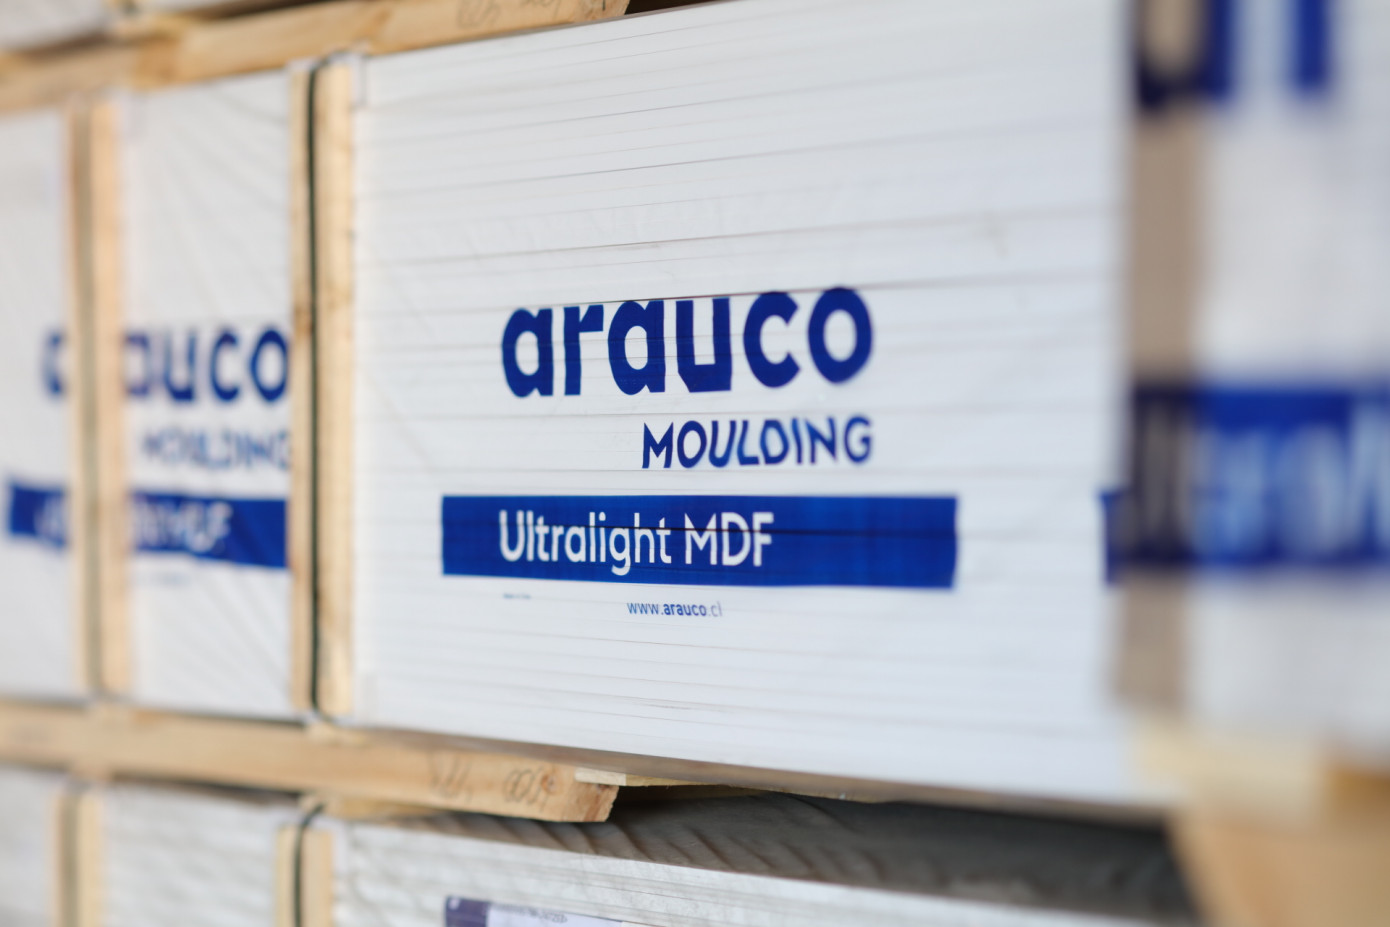 Arauco’s revenues increased by 19.5% in 1Q